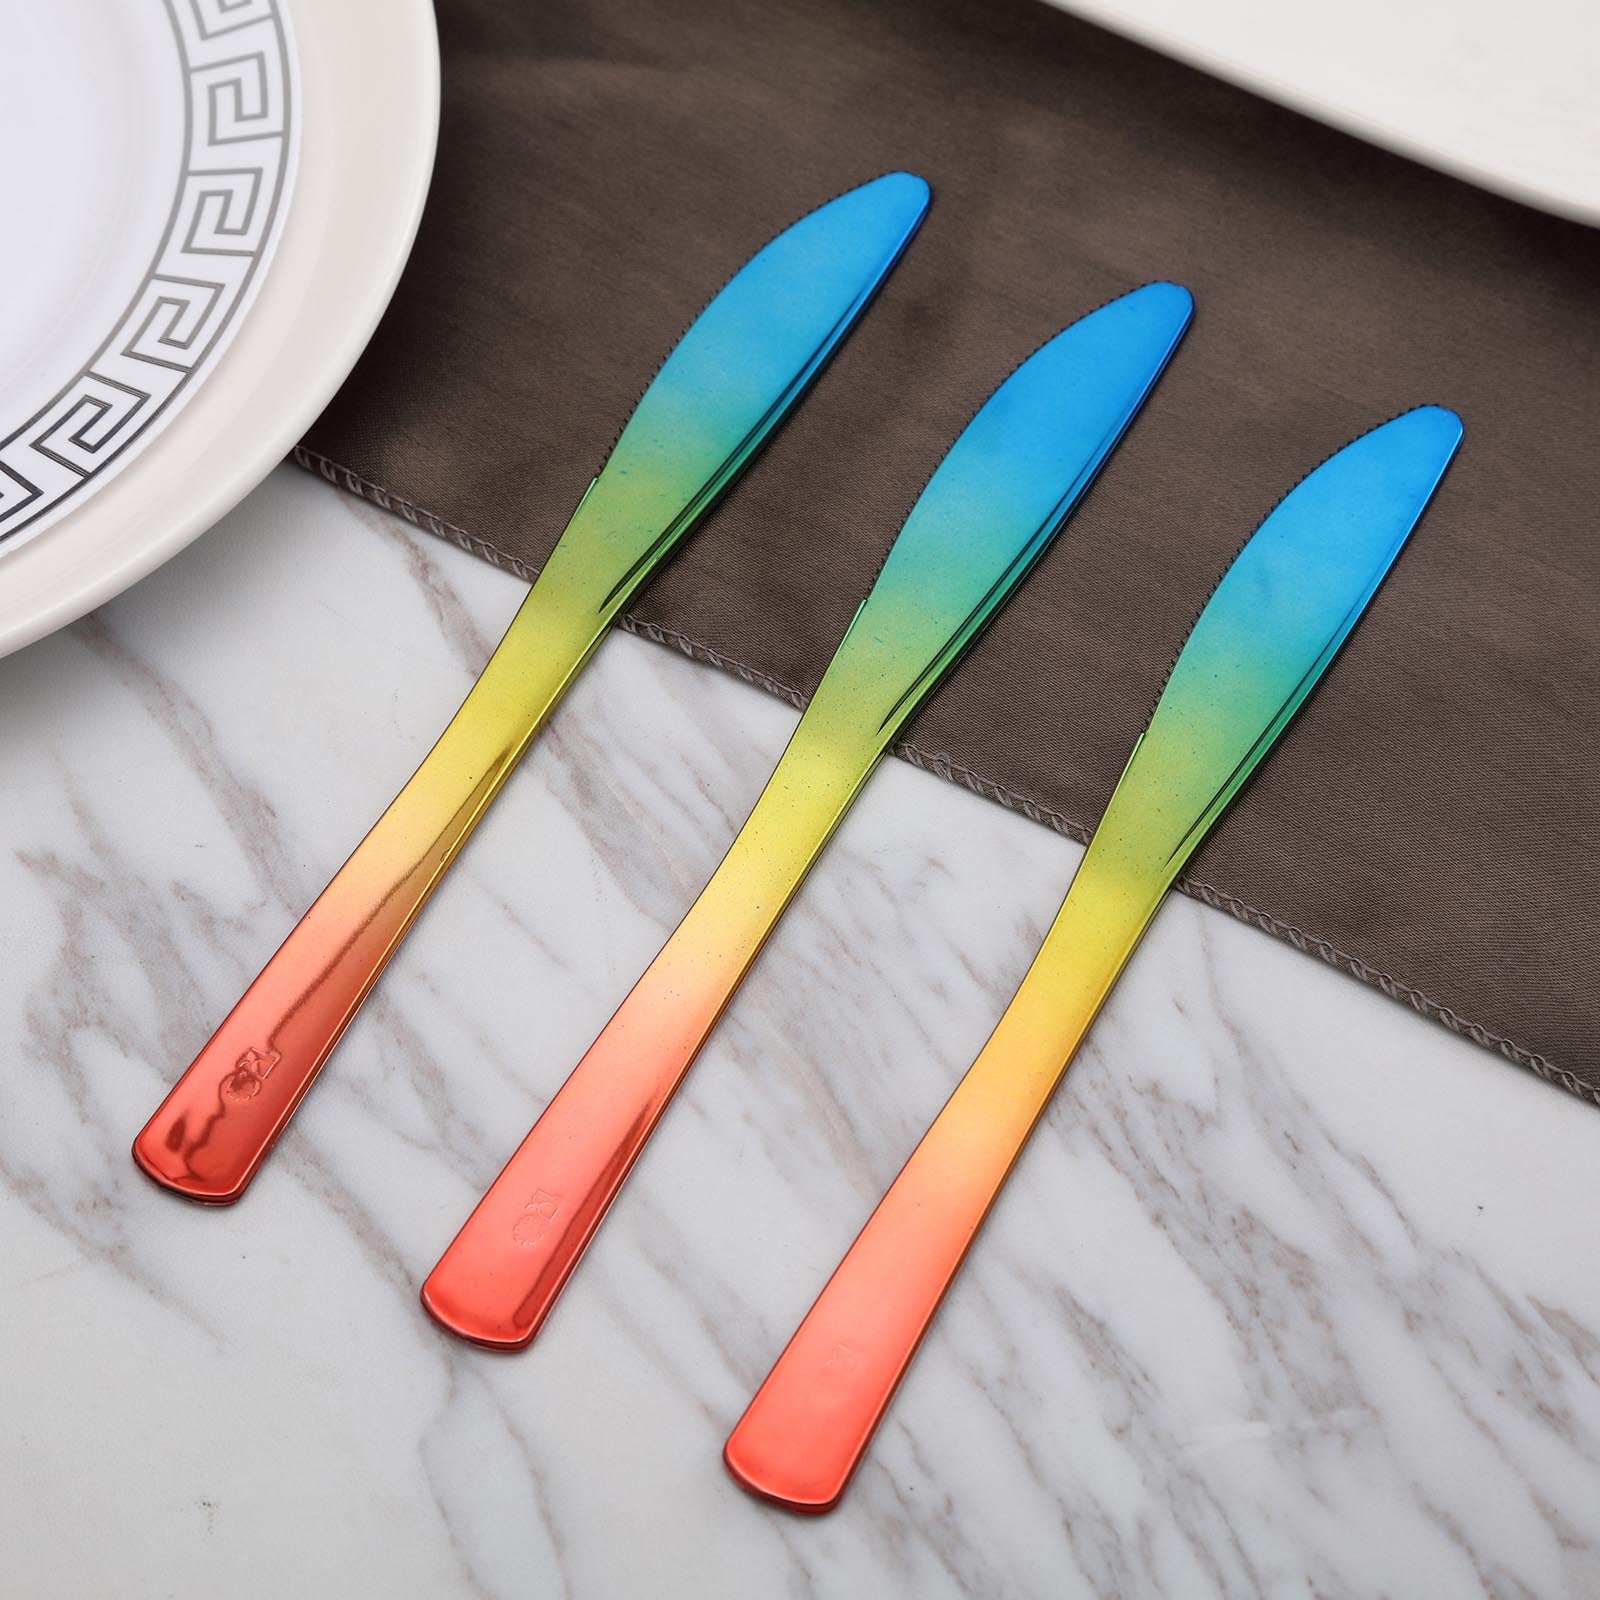 Ombre Design Plastic Knife, Plastic Silverware | TableclothsFactory